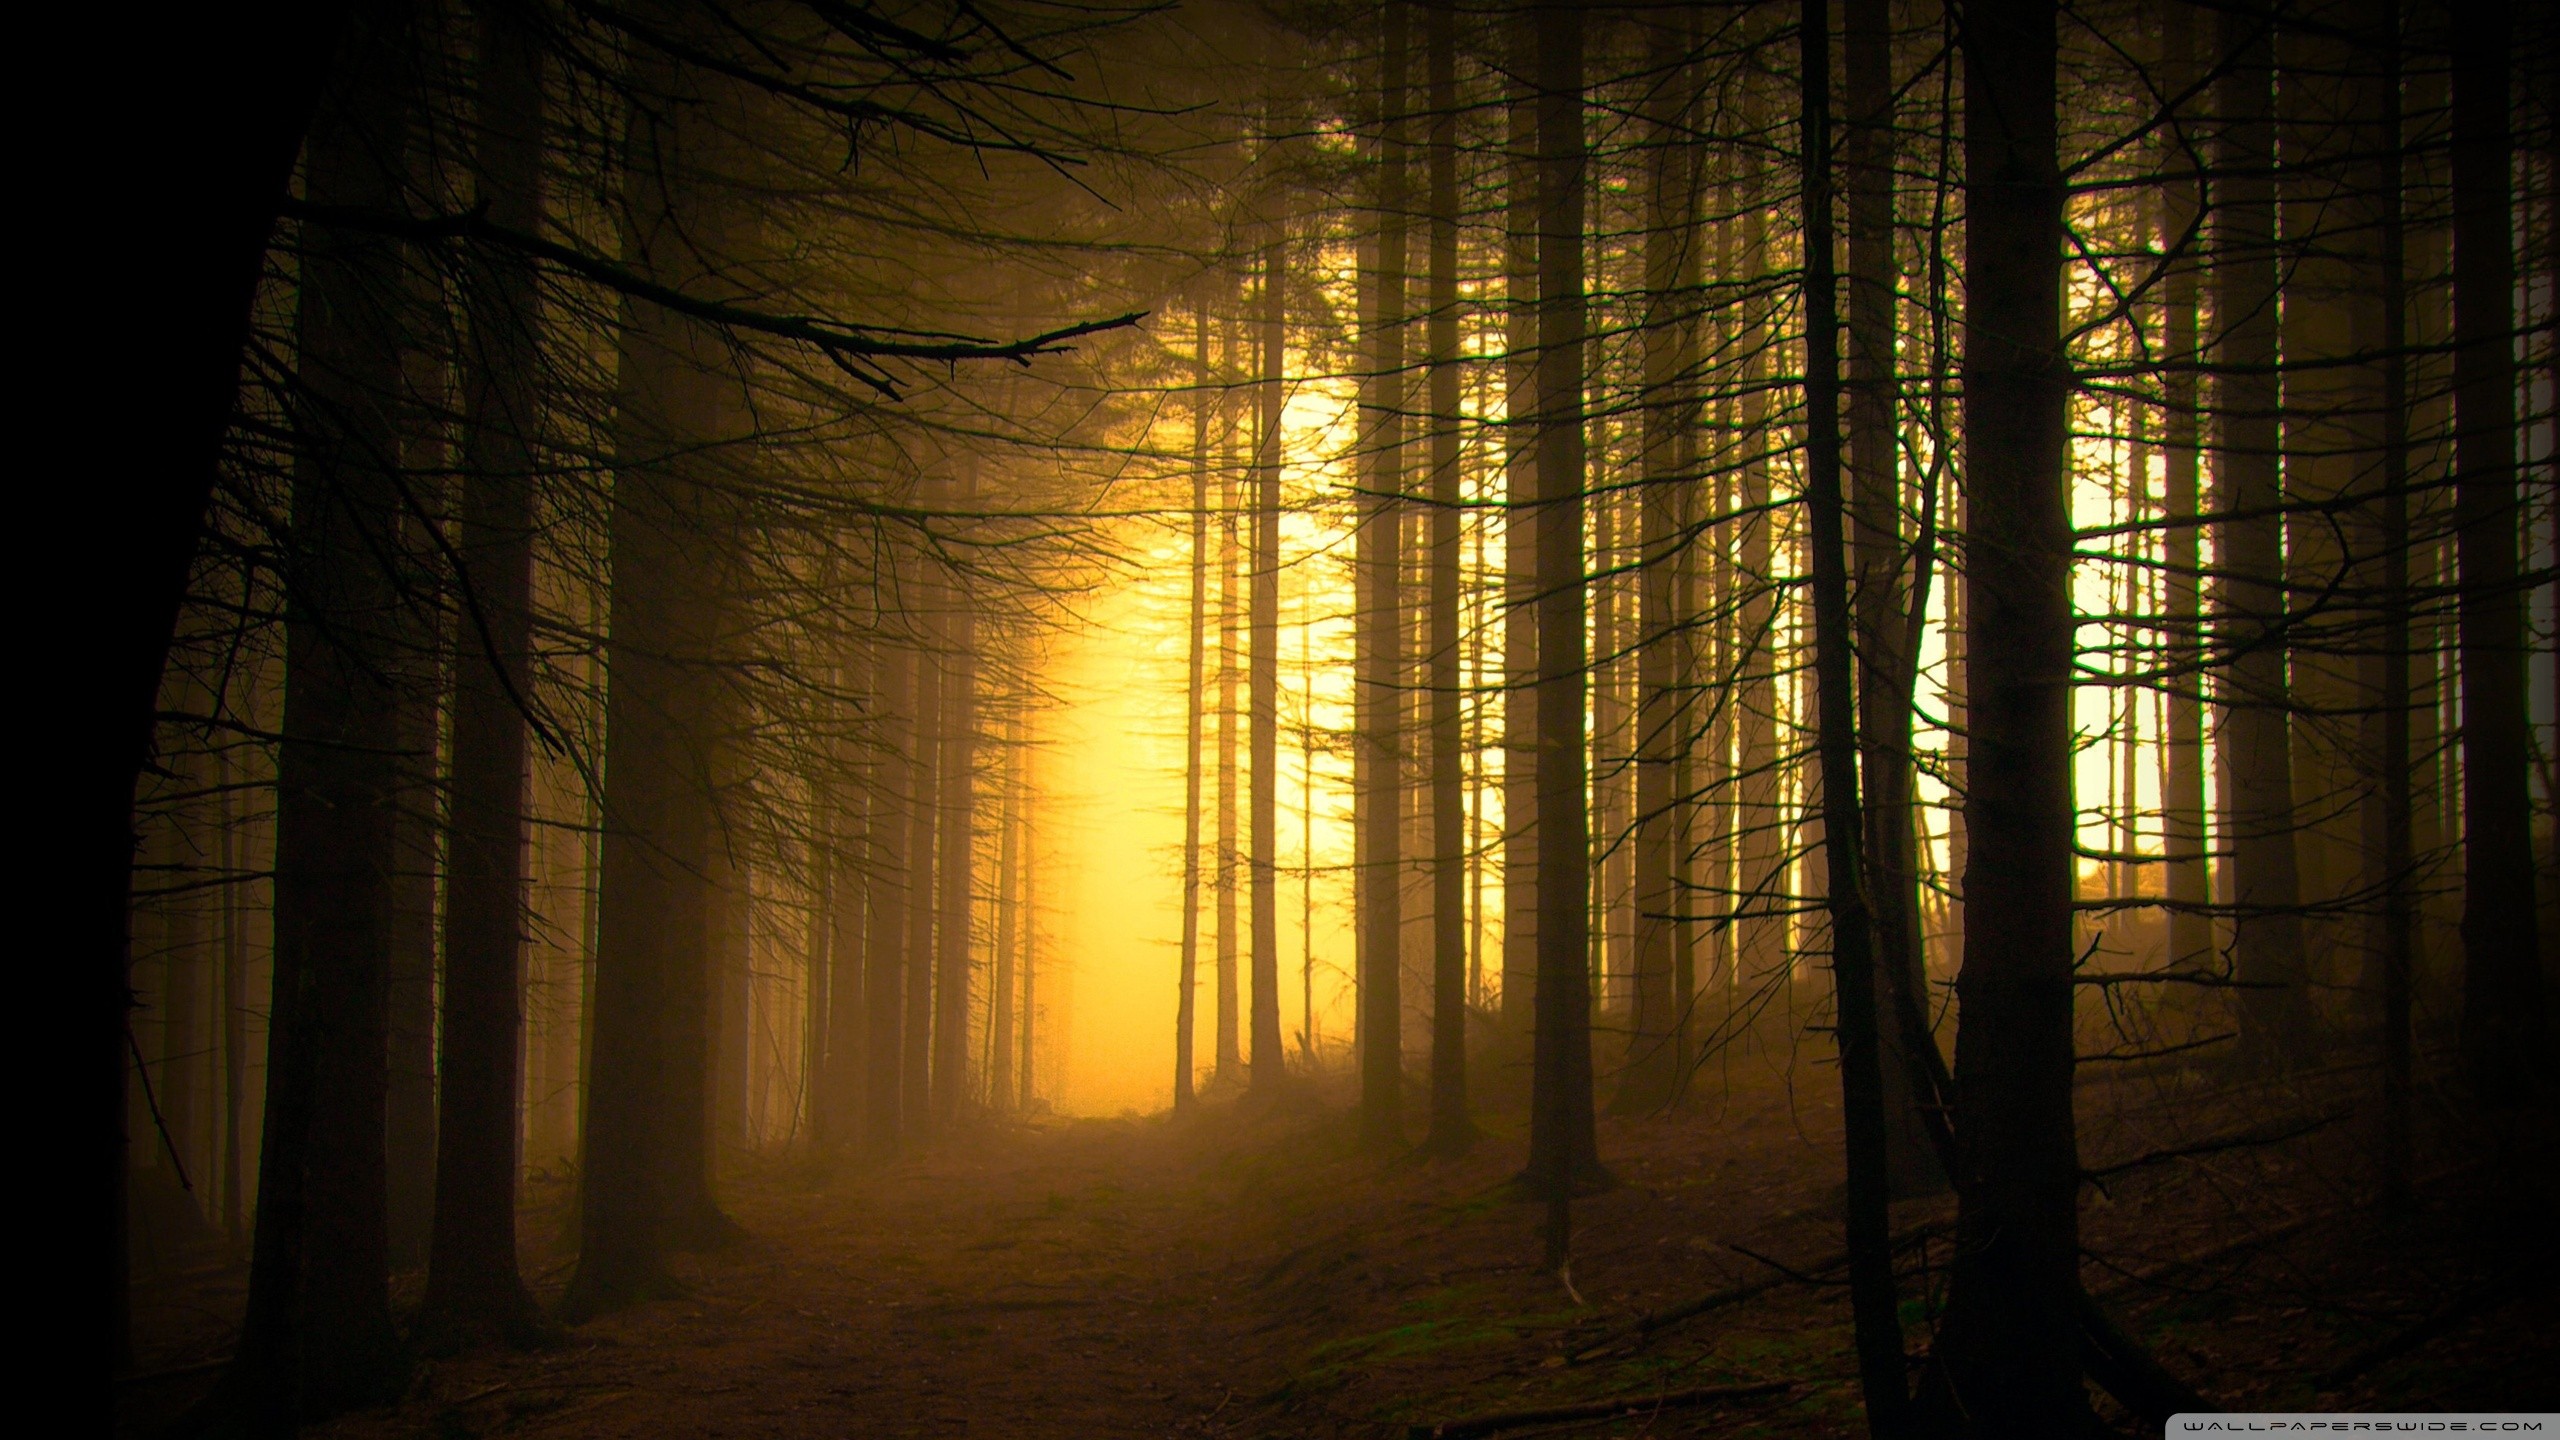 General 2560x1440 forest photography nature dark trees sunlight